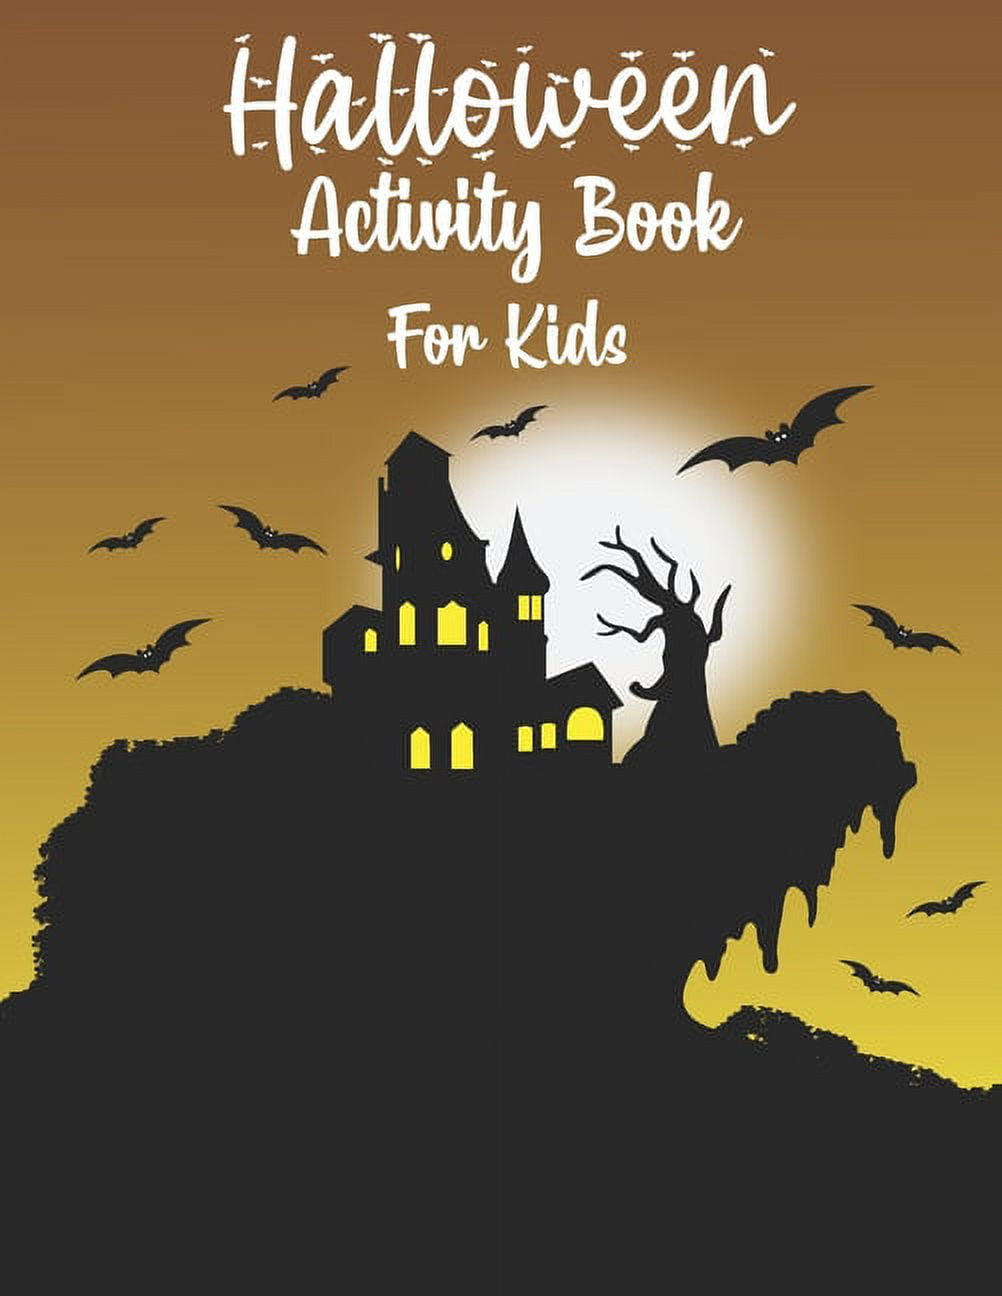 Halloween Coloring Book: For Kids Ages 4-8, 9-12 (Coloring Books